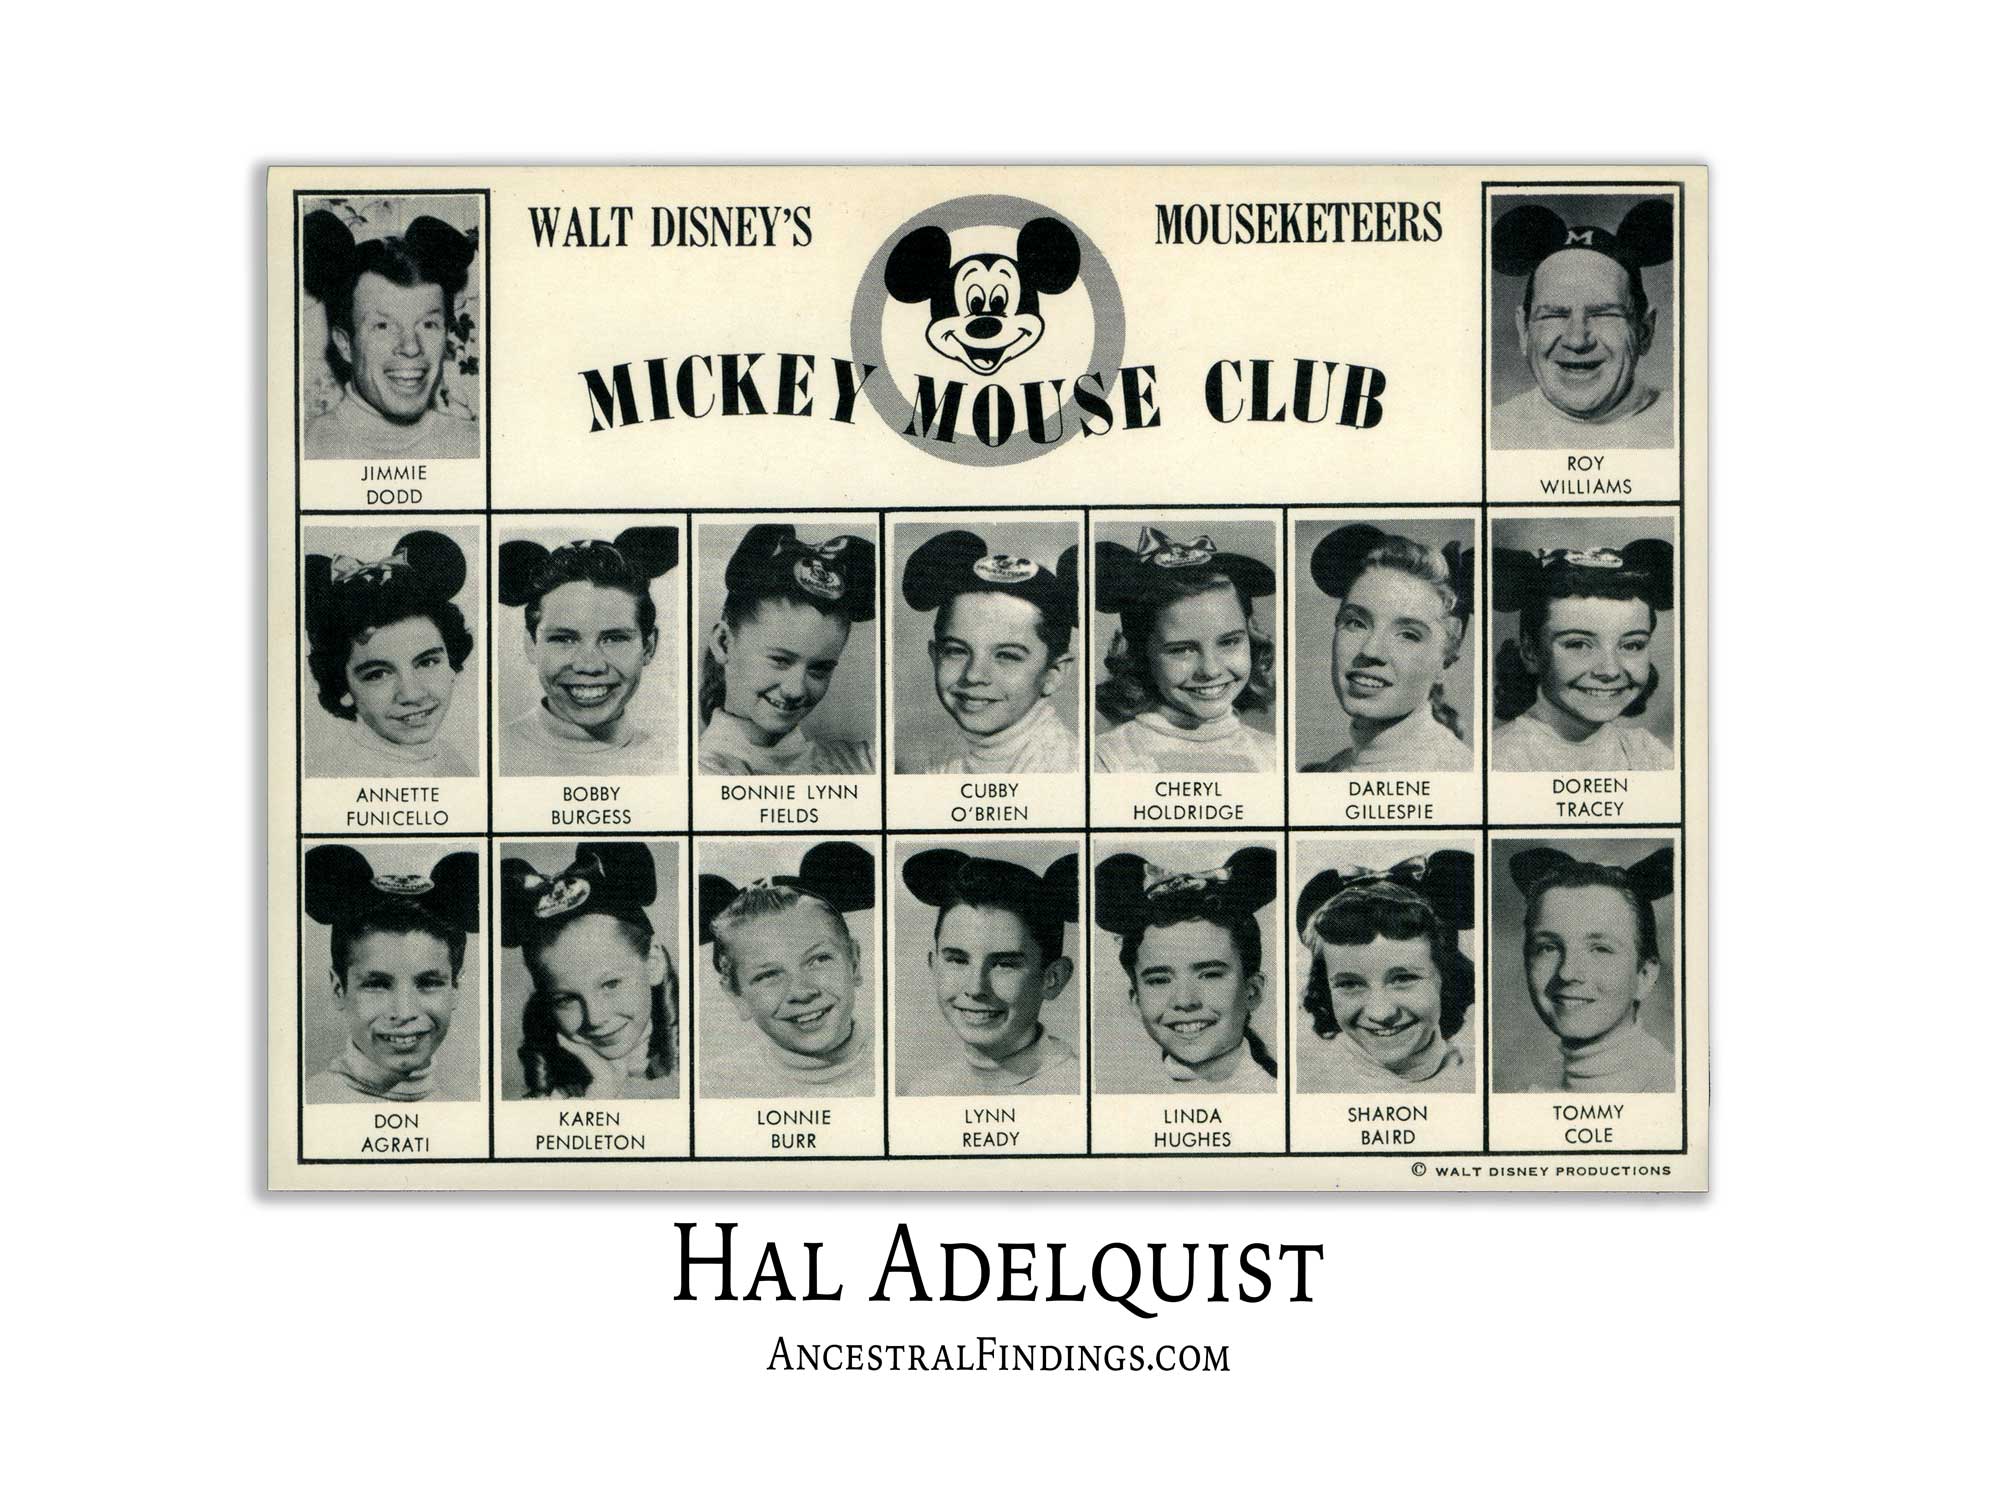 Hal Adelquist: The Mouseketeers #1